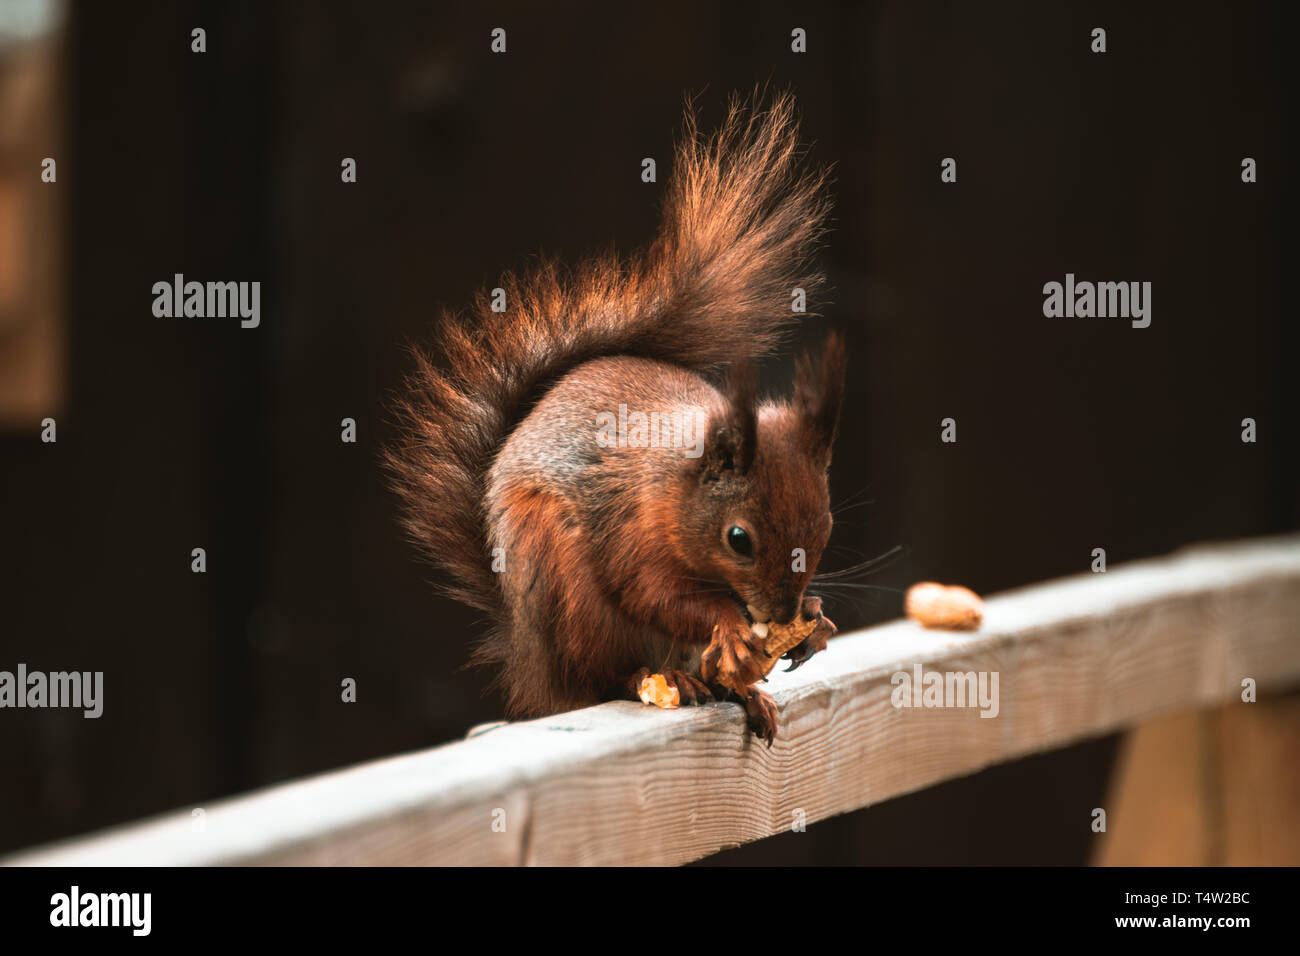 Eurasian red squirrel on a wooden fence eating nuts Stock Photo